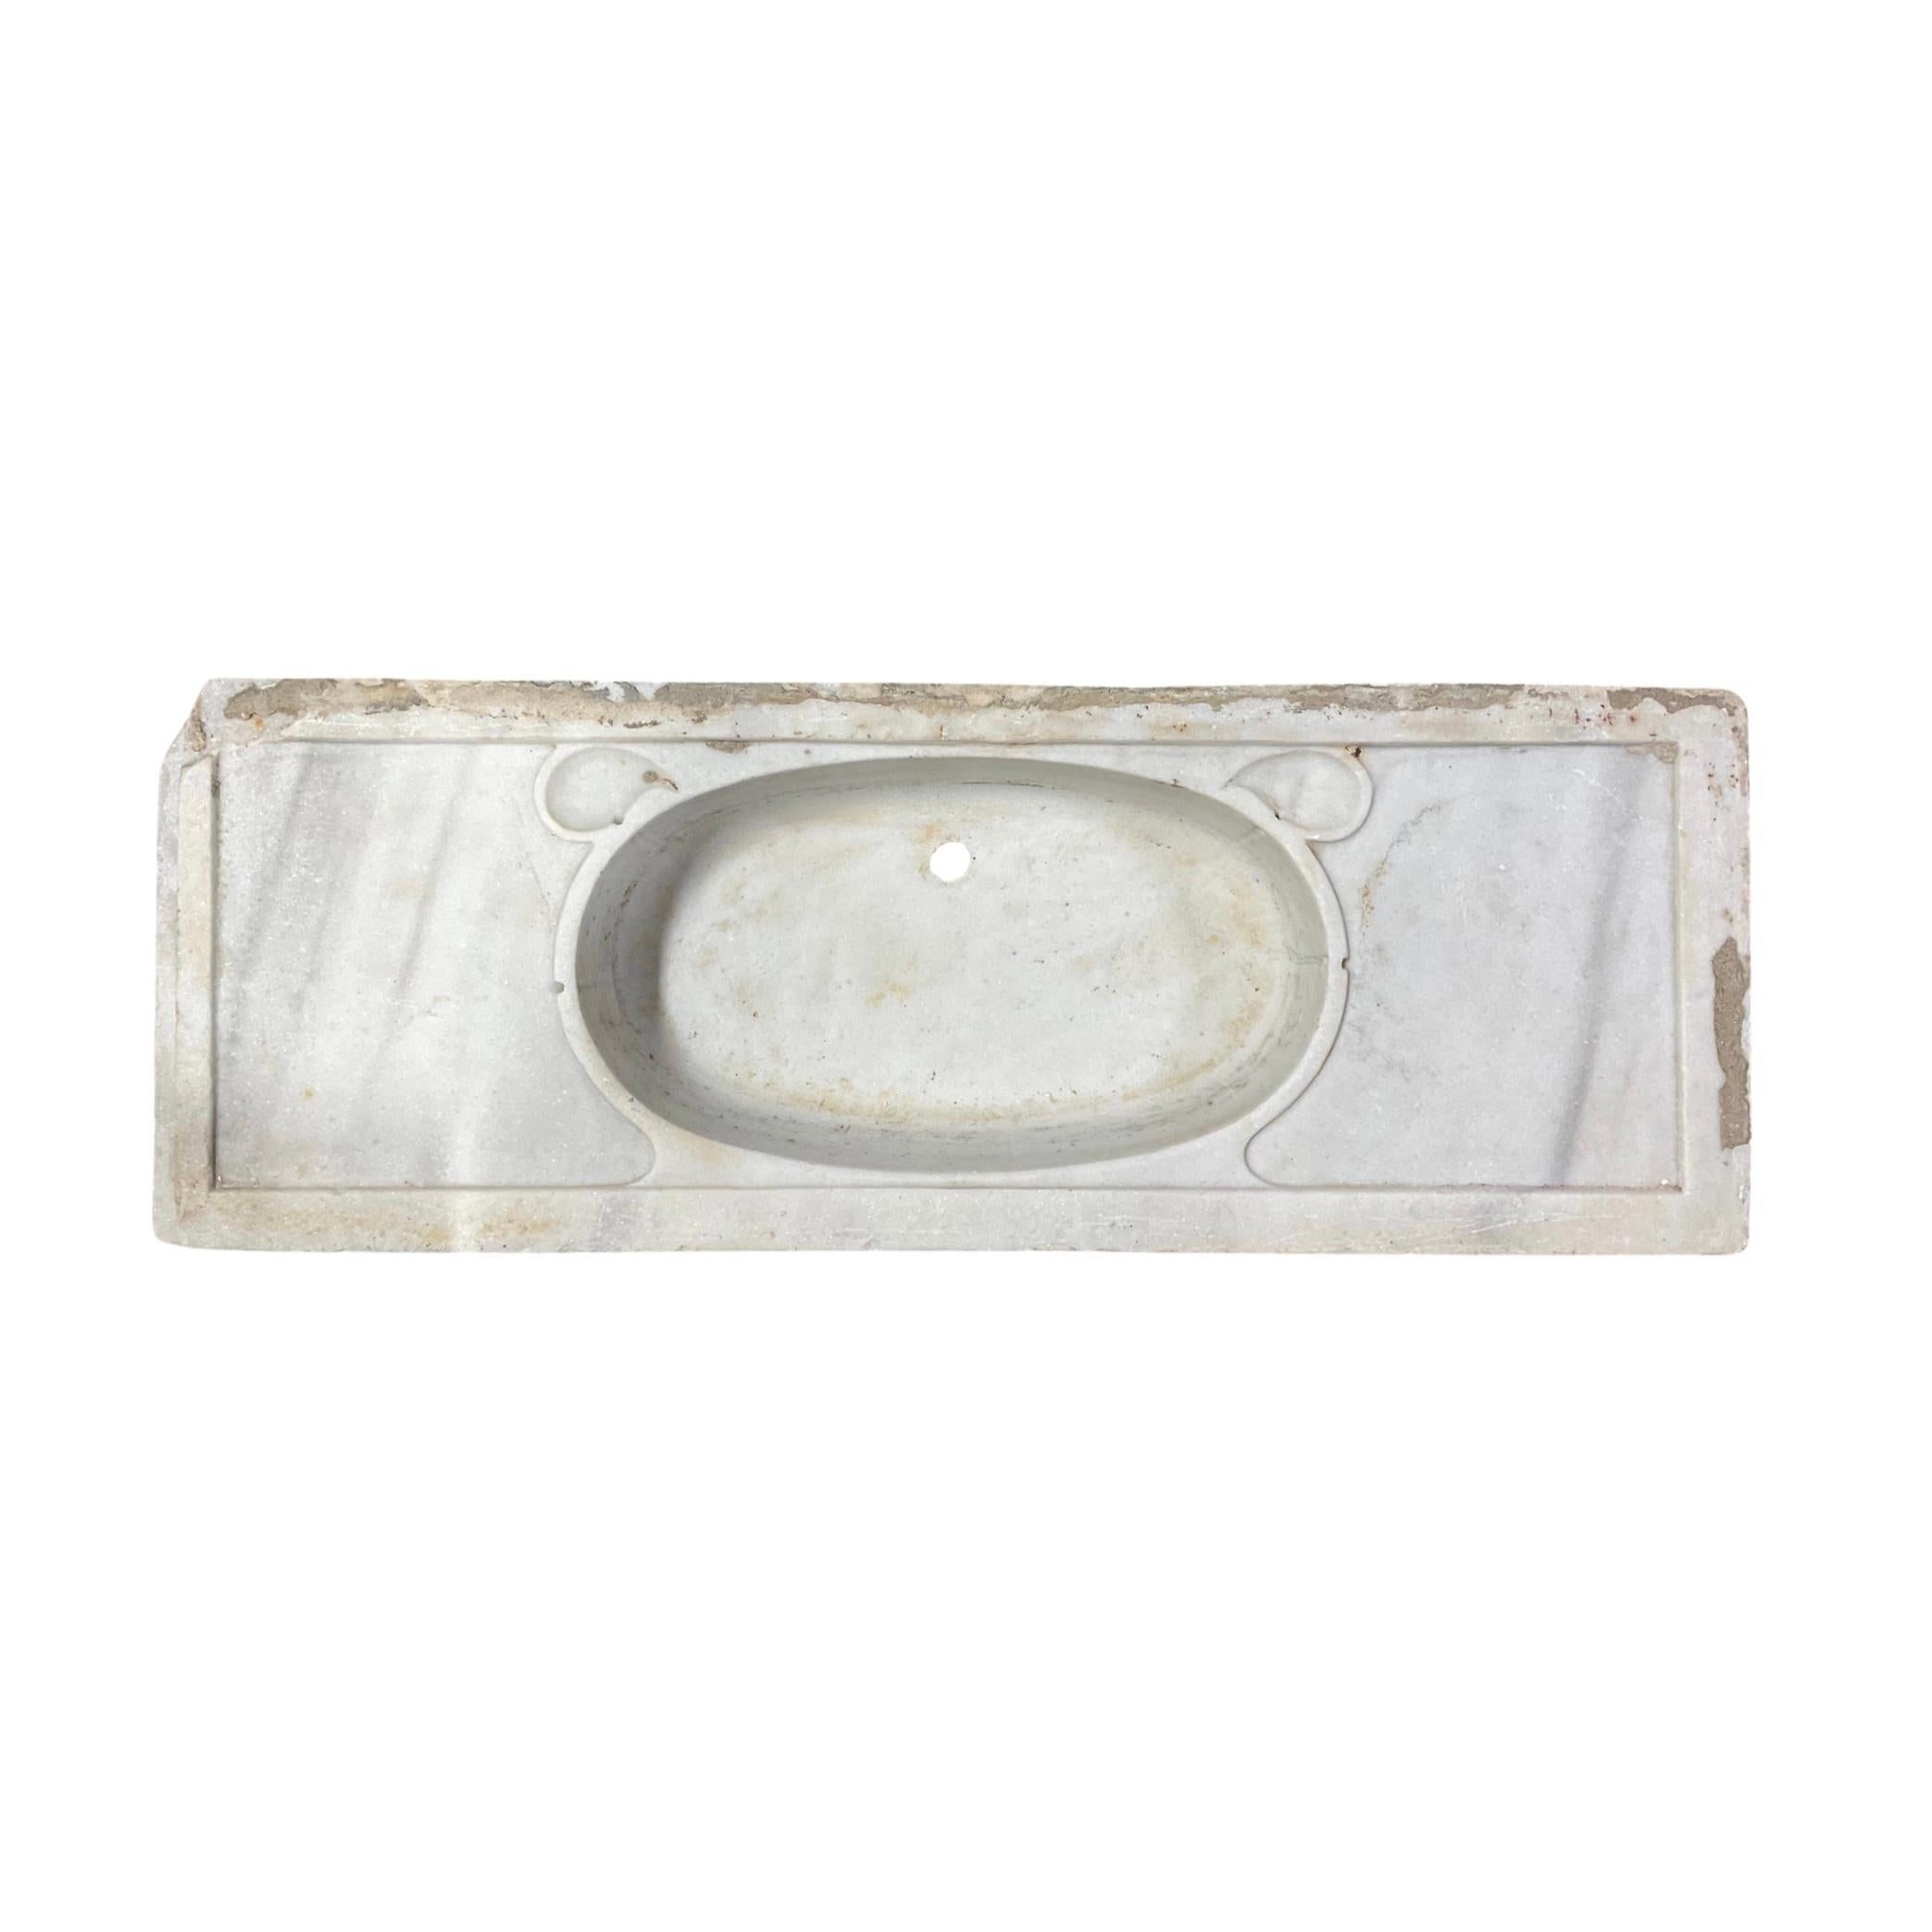 This classic French White Carrara Marble Sink from the 18th century will add a touch of elegance to any bathroom. Constructed of Carrara marble and with a pre-drilled hole for drainage, this sink provides the perfect combination of beauty and